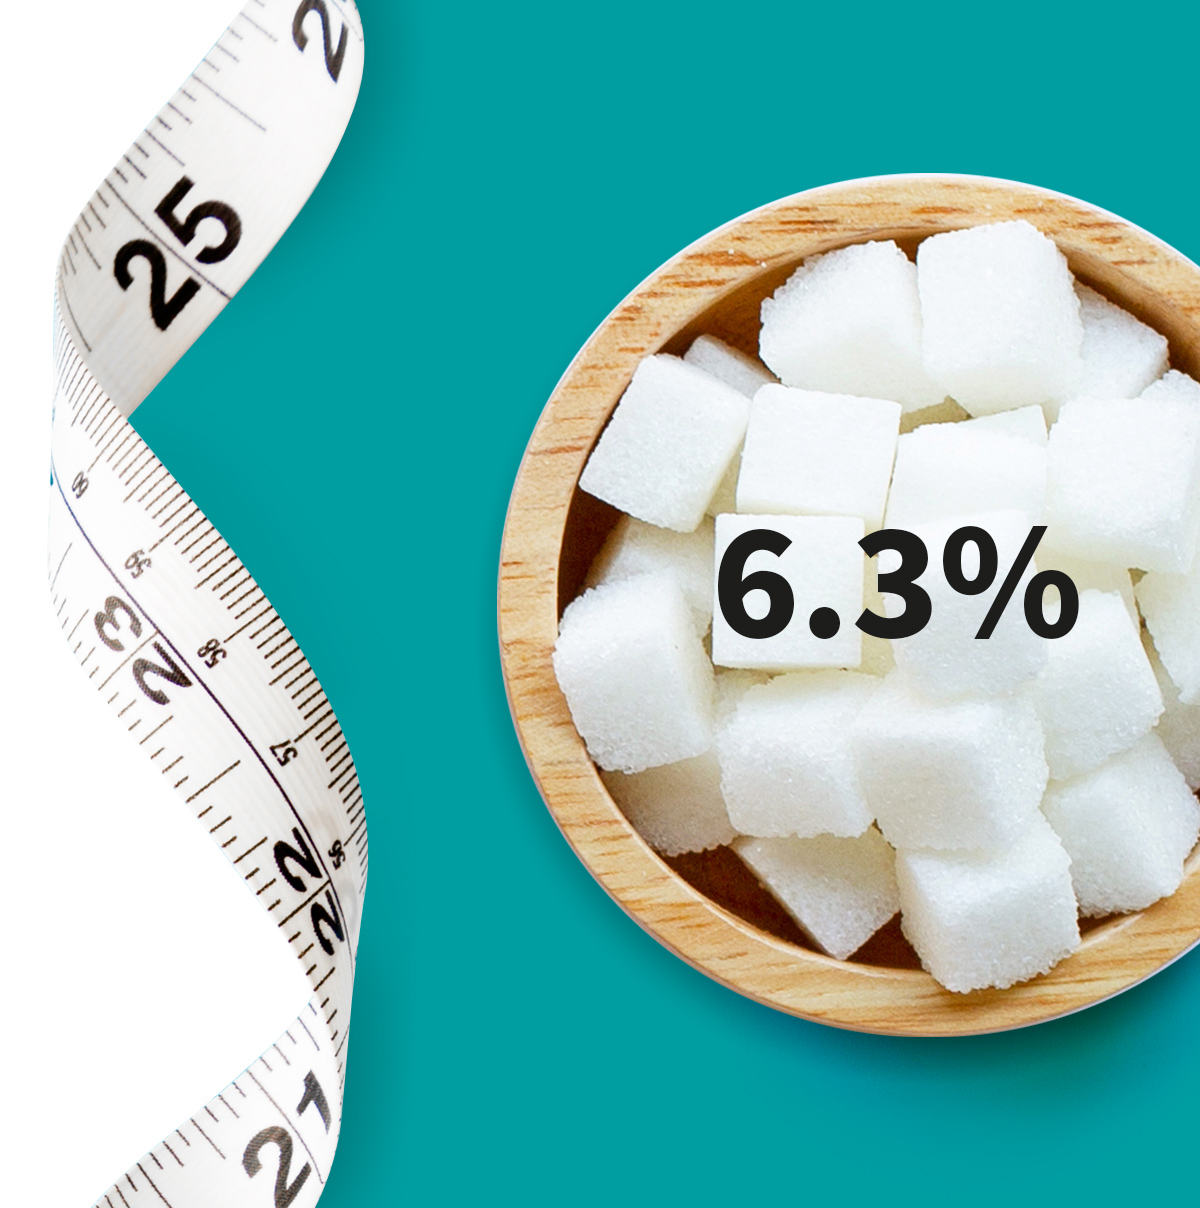 [.SE-se Sweden (swedish)] •	A measuring tape and a bowl full of sugar cubes shown as a metaphor for diabetes